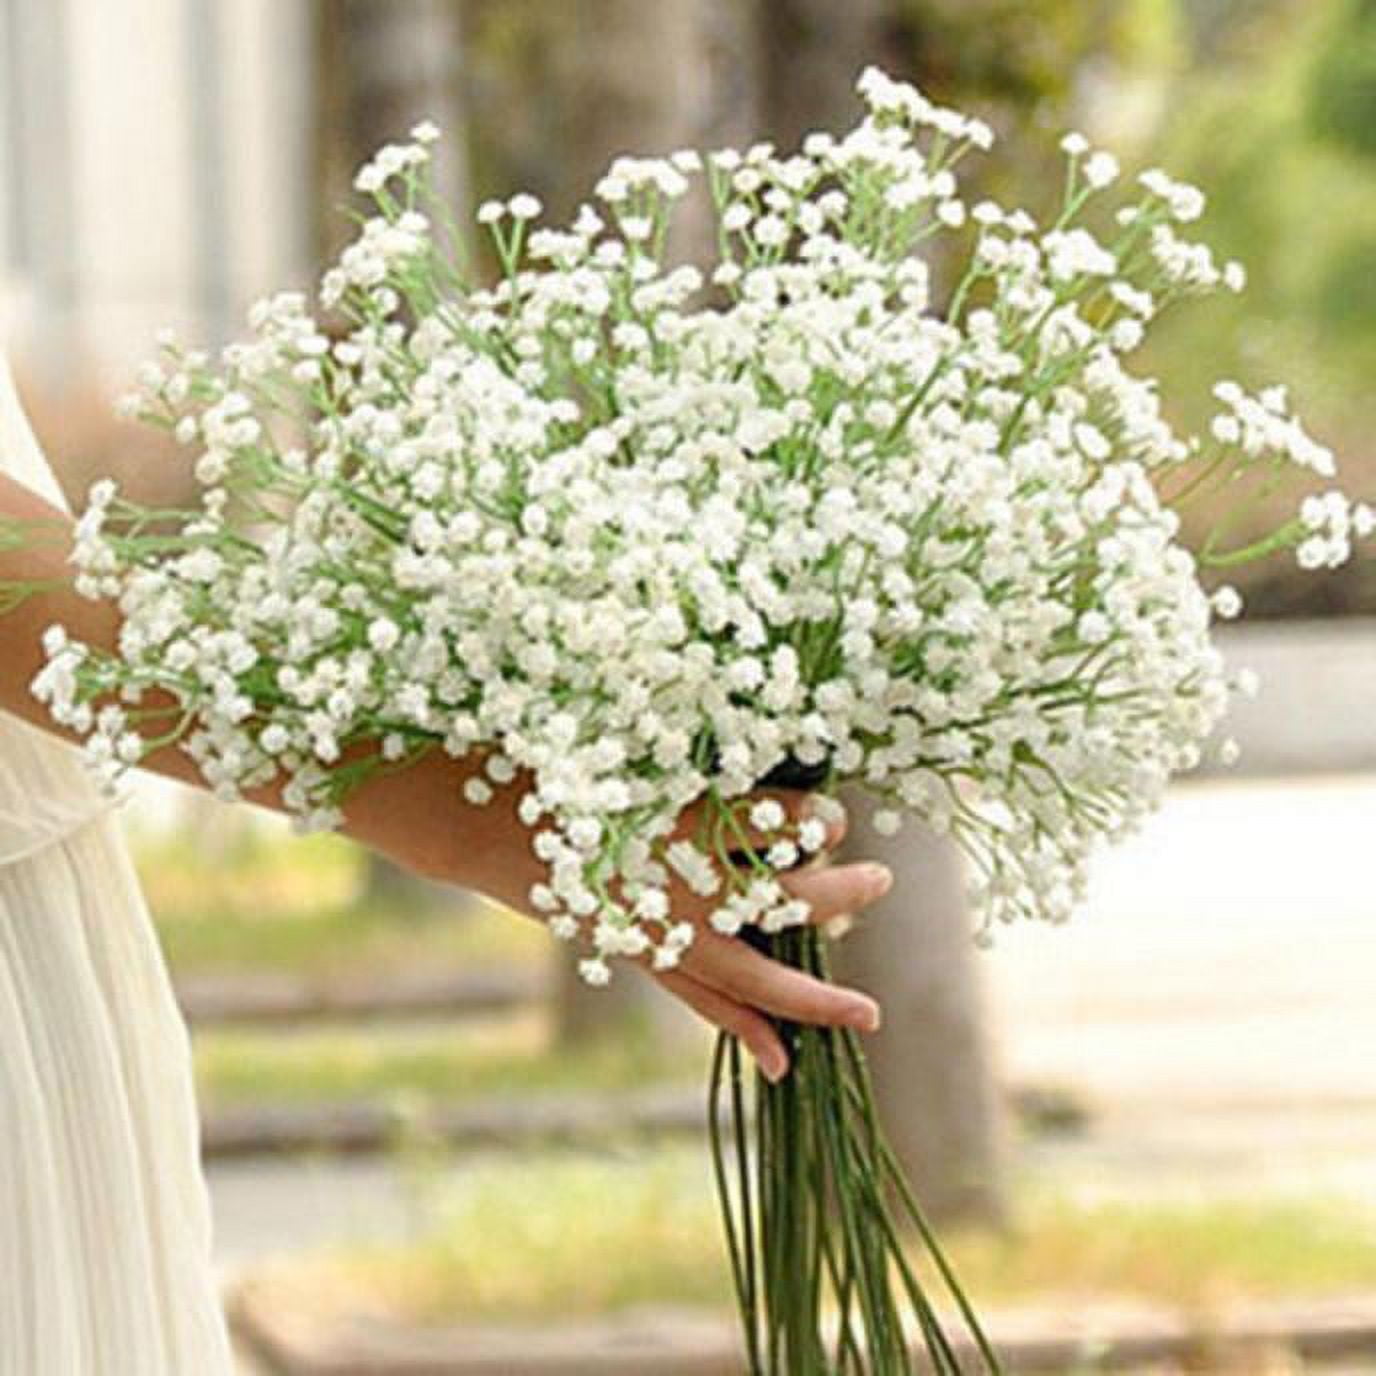 SDJMa Artificial Baby Breath Gypsophila Flowers Bouquets Real Touch Flowers for Wedding Party DIY Wreath Floral Arrangement Home Decoration (White) - image 5 of 9